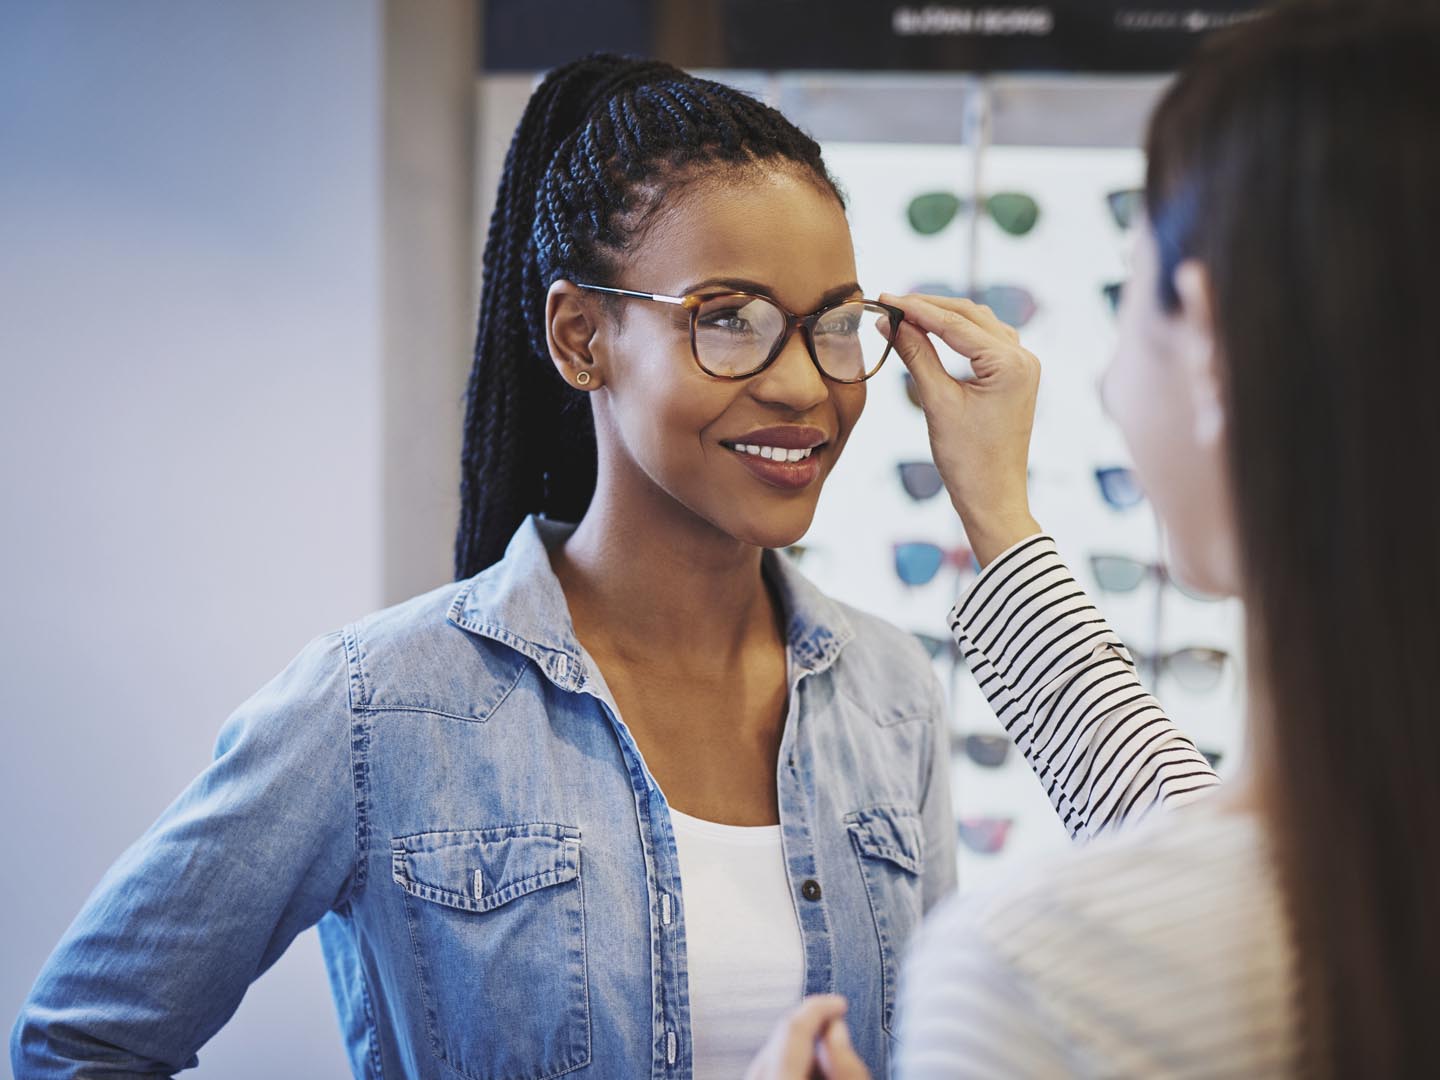 Optometrist fitting glasses on an attractive African American woman customer inside a store as she selects a frame